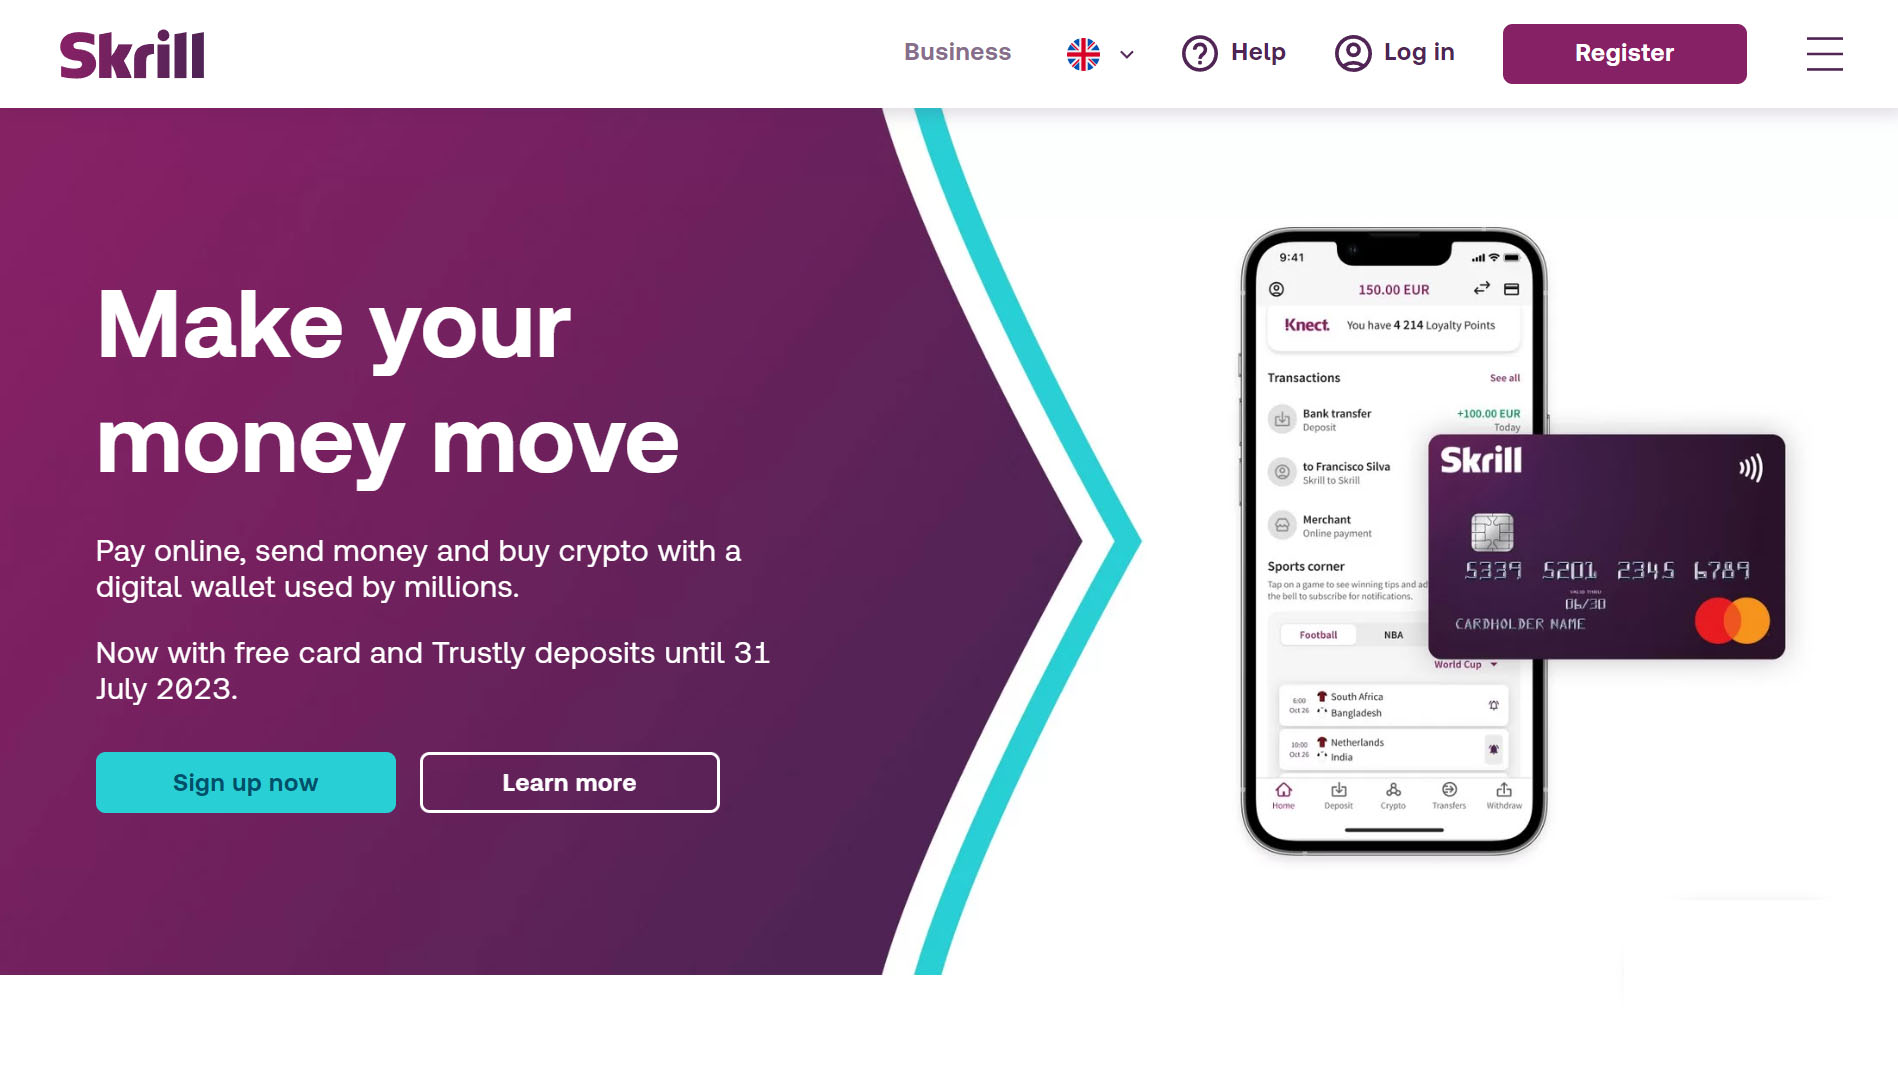 Skrill upgrades digital wallet with new fiat-to-crypto withdrawal service